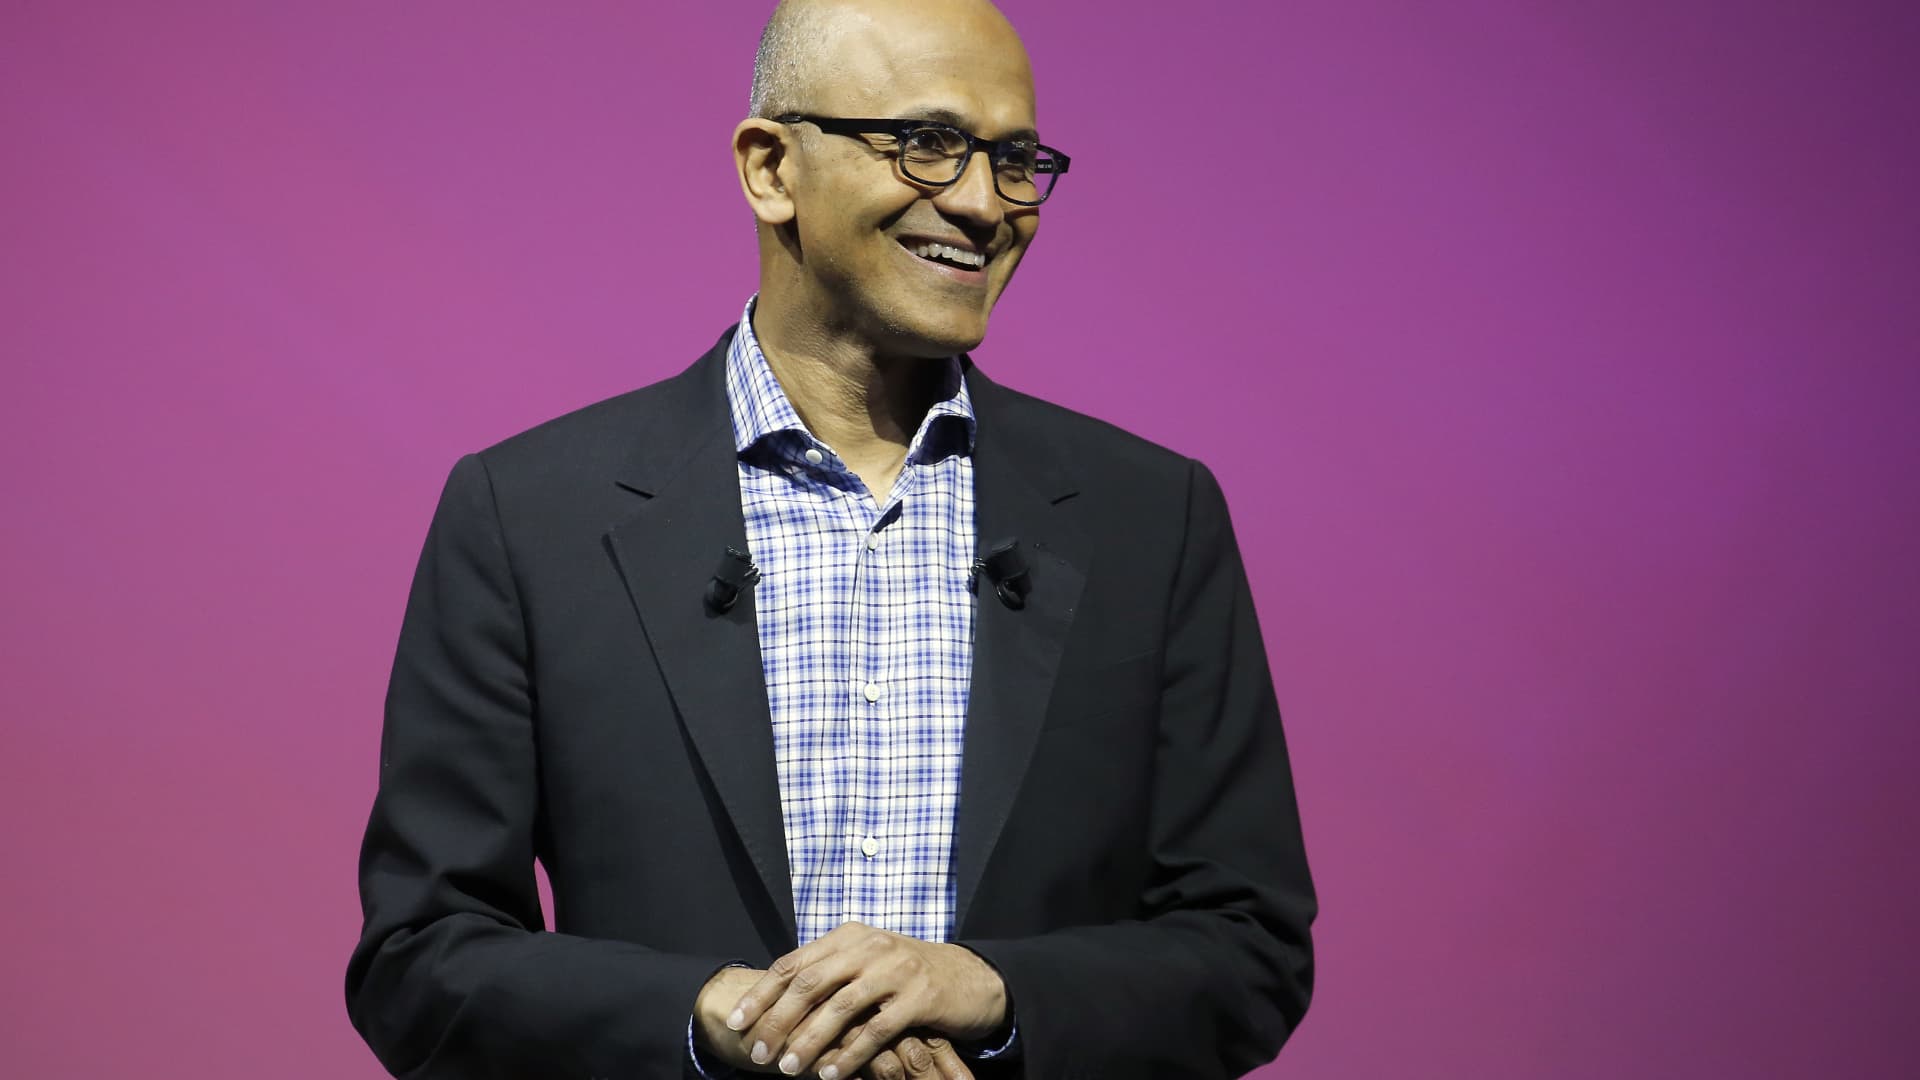 Microsoft's CEO Satya Nadella speaks to participants during the Viva Technologie show at Parc des Expositions Porte de Versailles on May 24, 2018, in Paris.